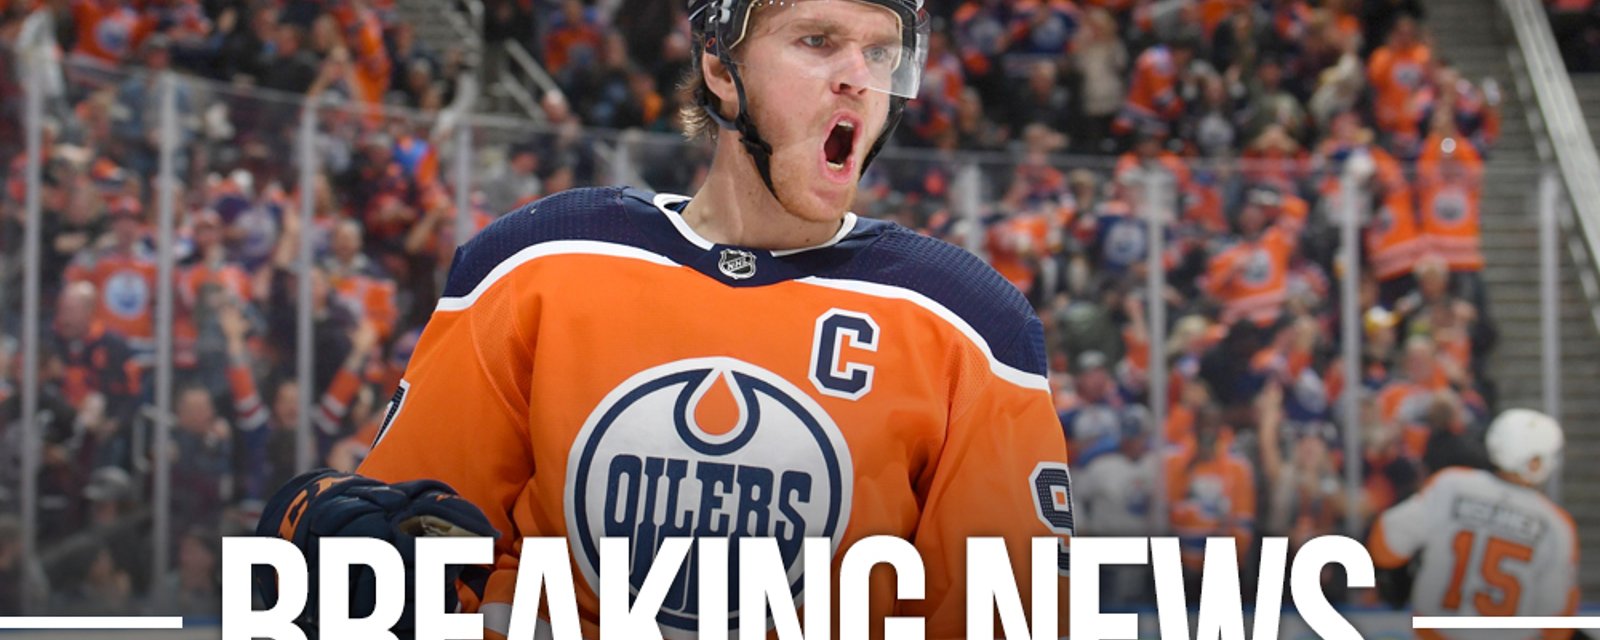 Connor McDavid has tested positive for COVID-19